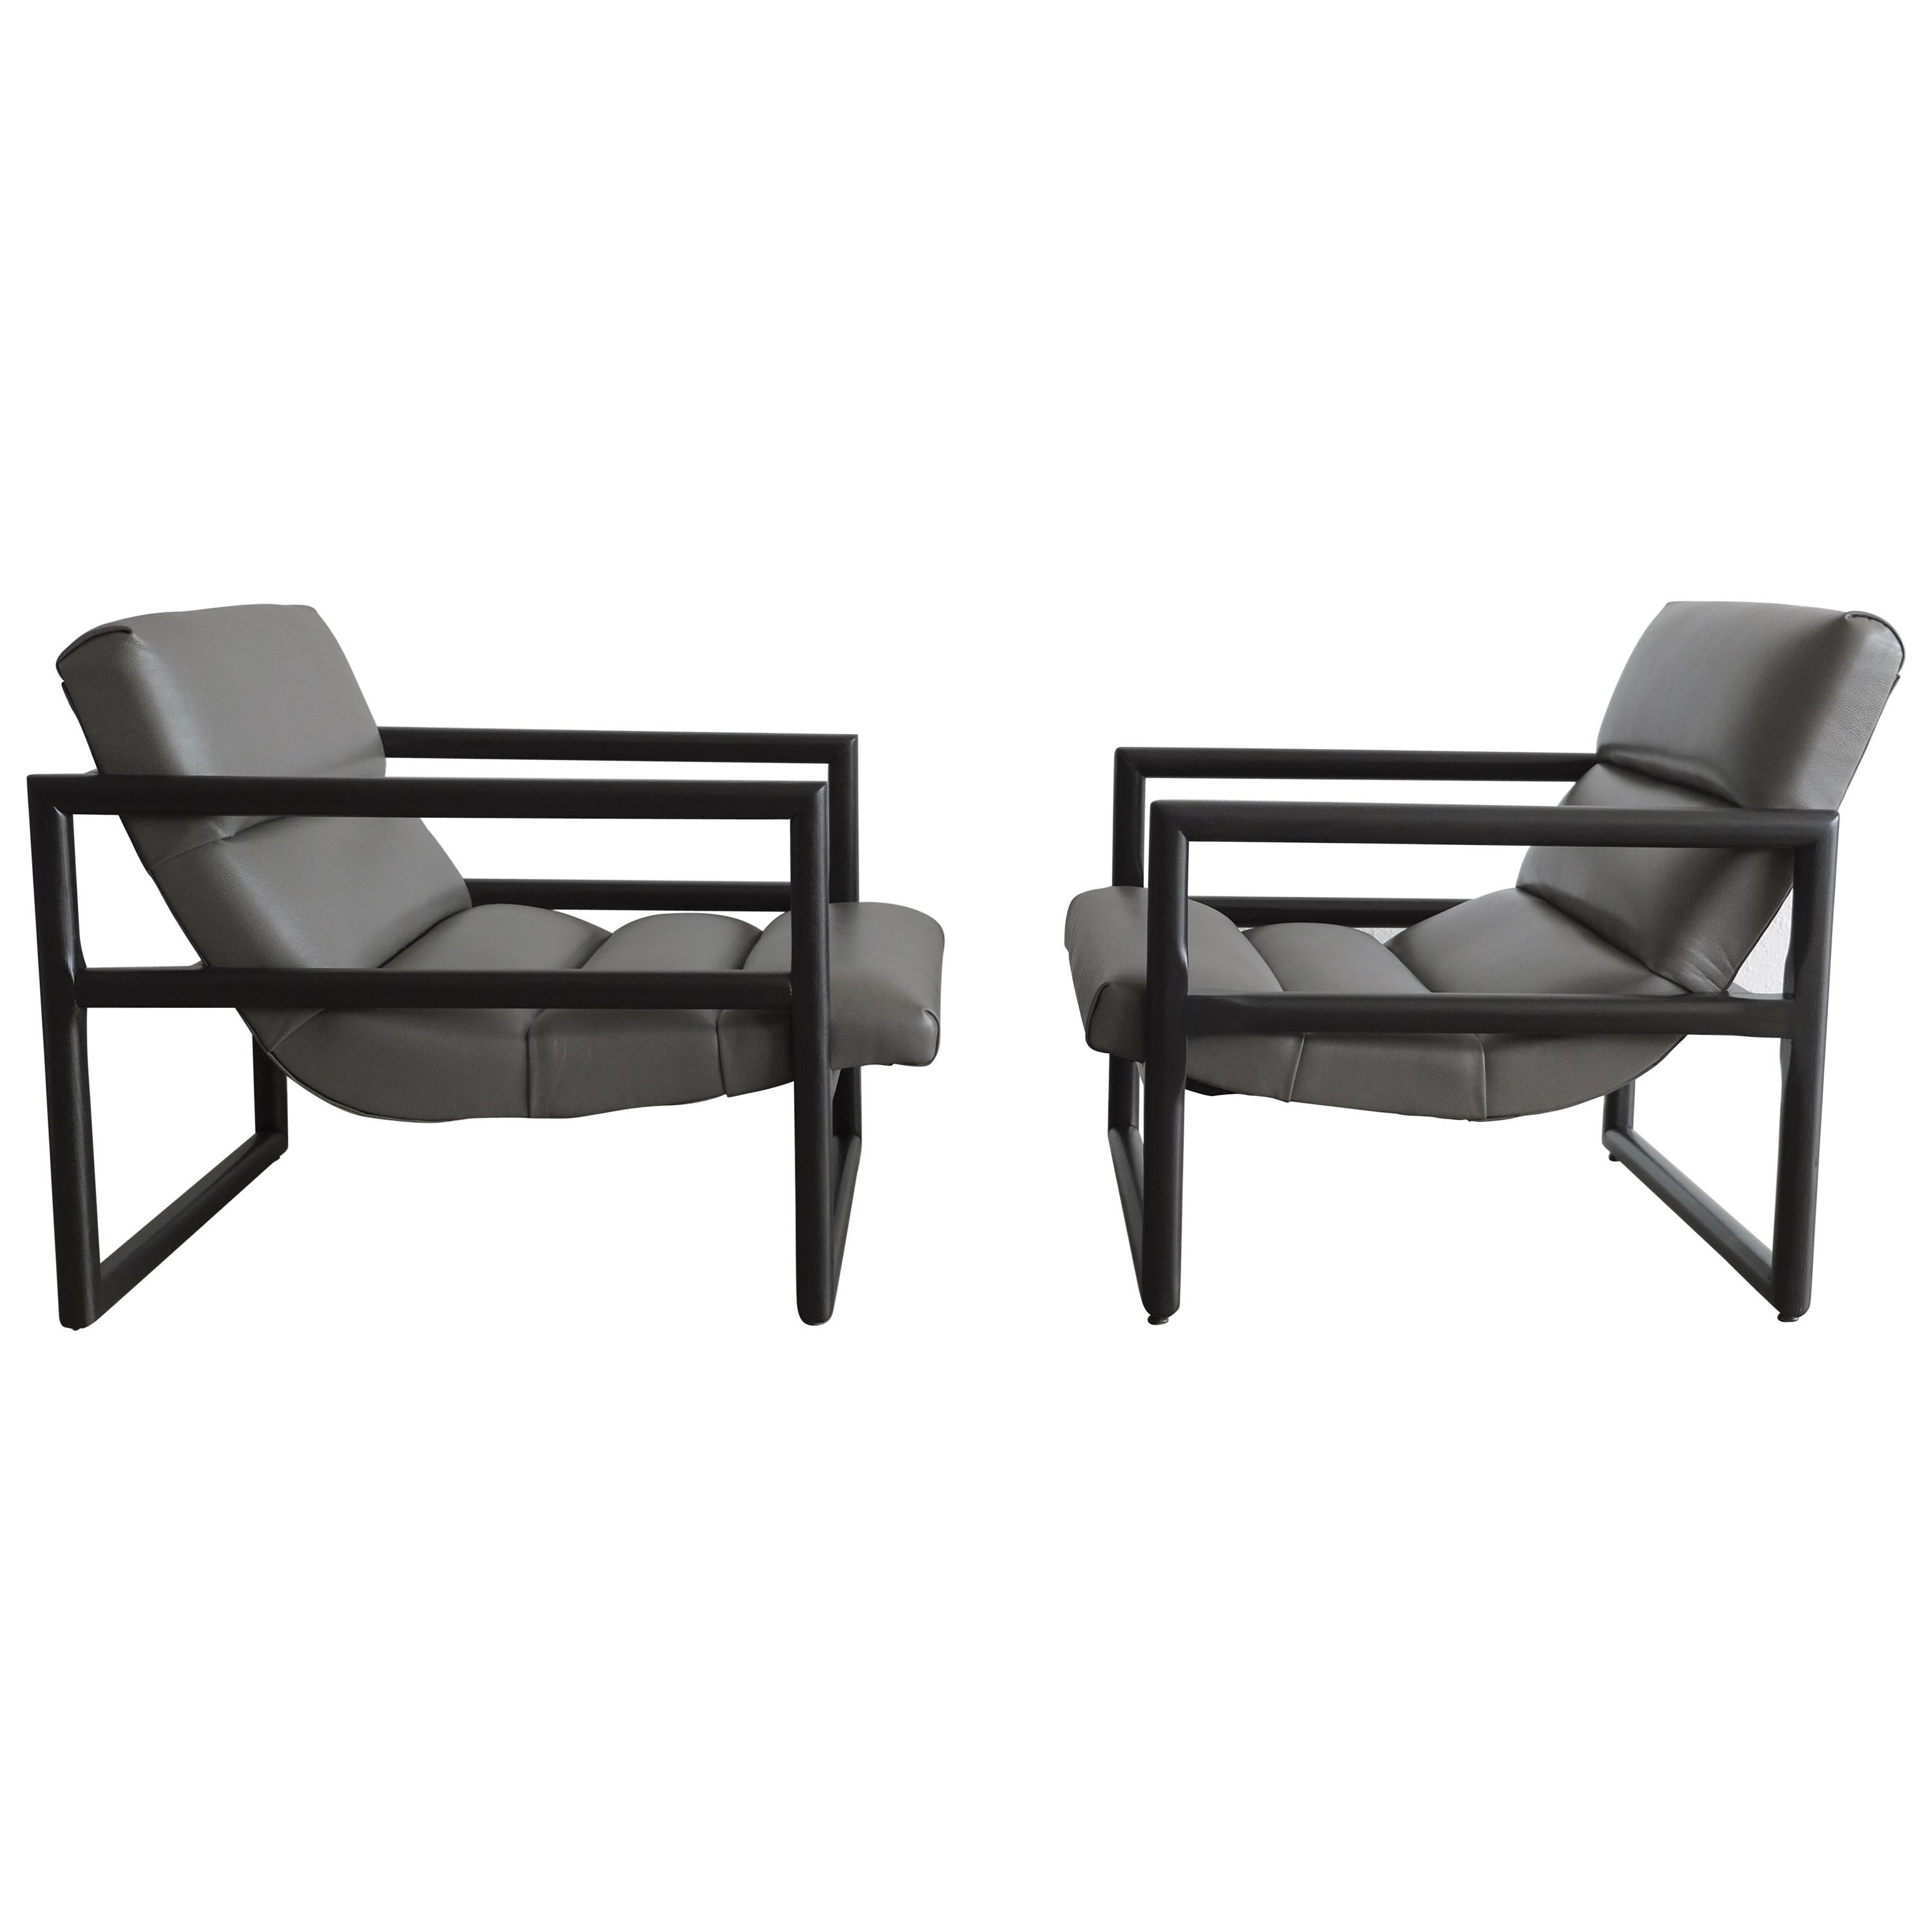 Two Milo Baughman Scoop Lounge Chairs in Ebonized Black and Grey Leather For Sale